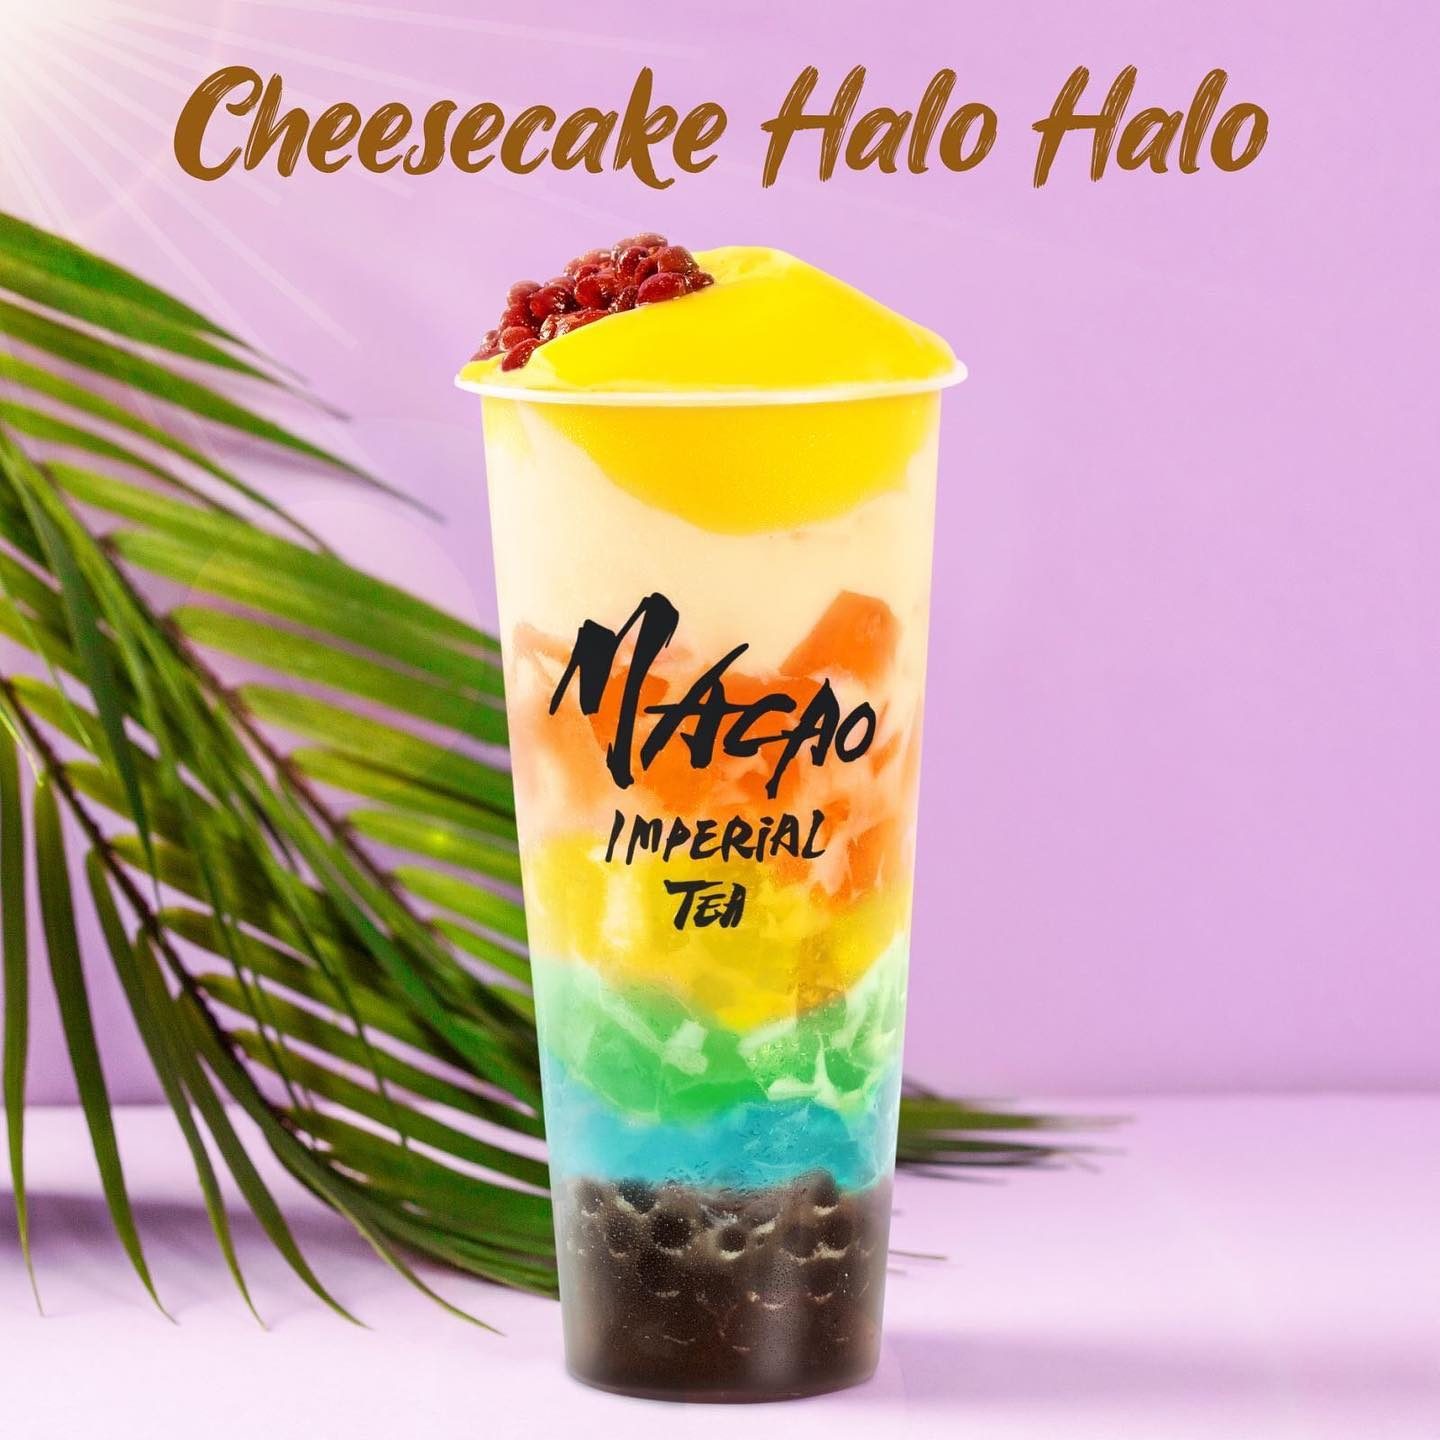 Macao Imperial Tea introduces Cheesecake Halo Halo drink